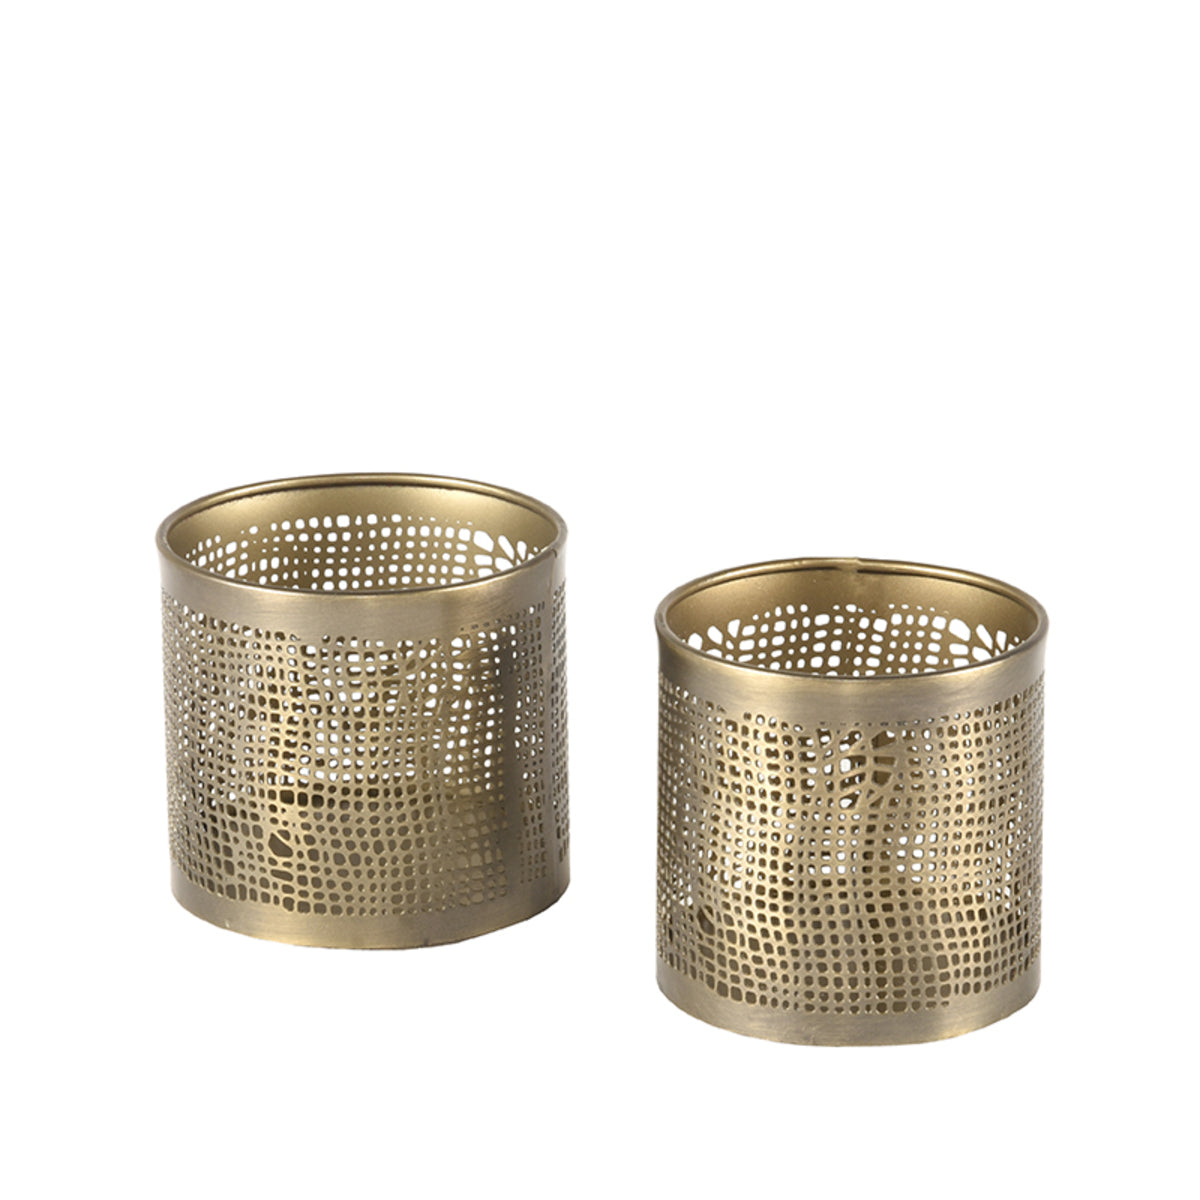 LABEL51 Candle holders - Antique gold - Metal - M